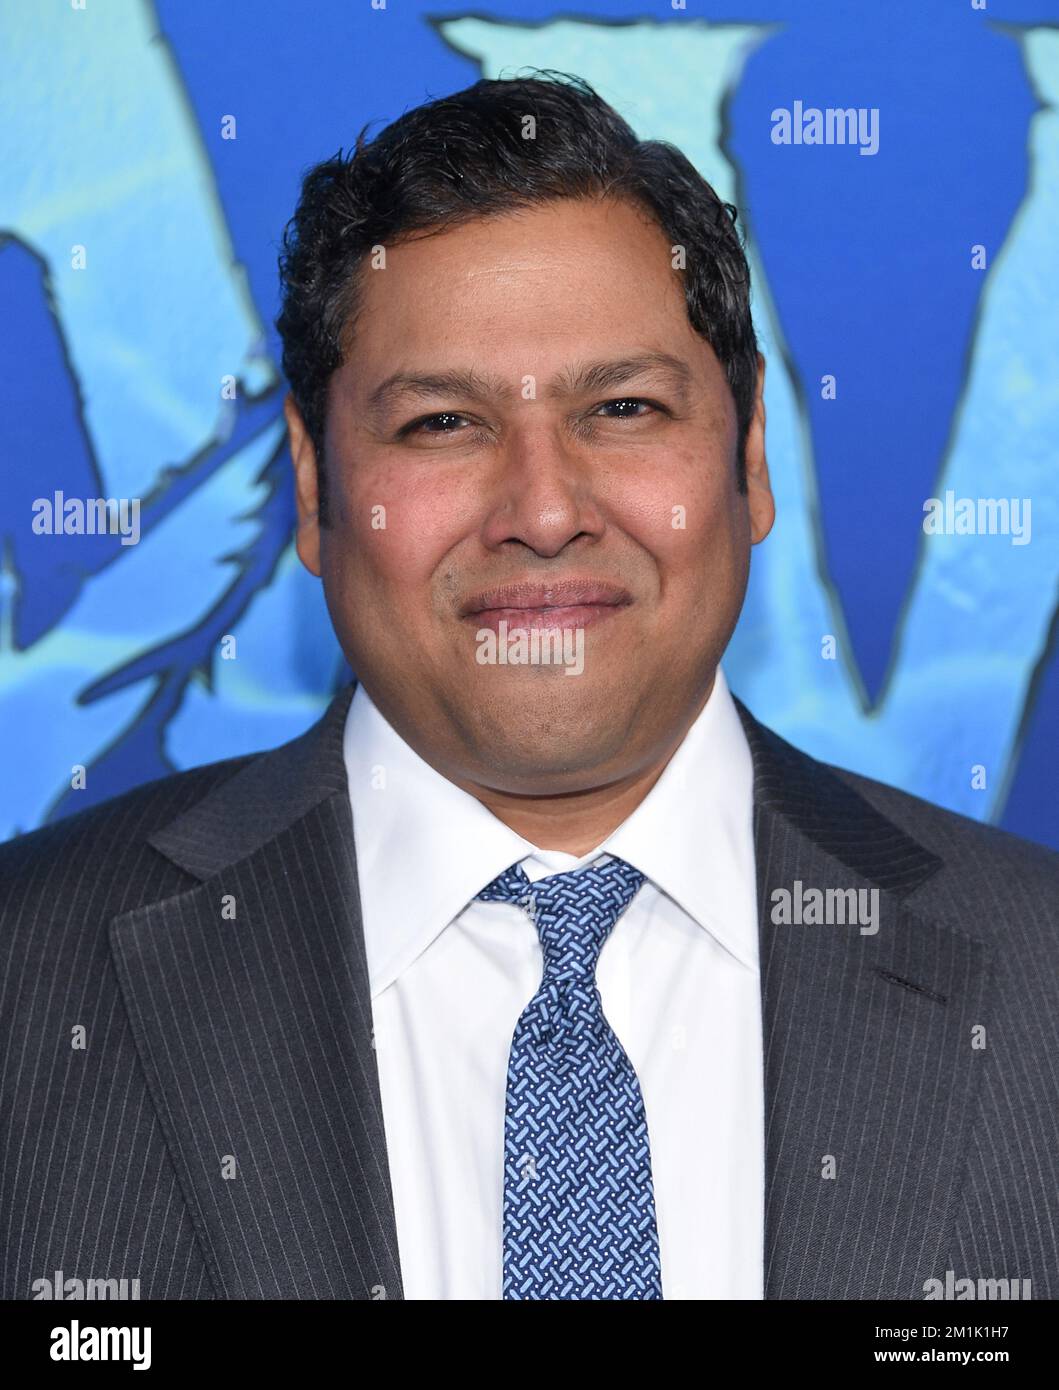 Hollywood, CA on December 12, 2022. Dileep Rao arriving to the U.S. premiere of 20th Century Studios’ “Avatar: The Way of Water”   held at the Dolby Theatre in Hollywood, CA on December 12, 2022. © Lisa OConnor / AFF-USA.com Stock Photo